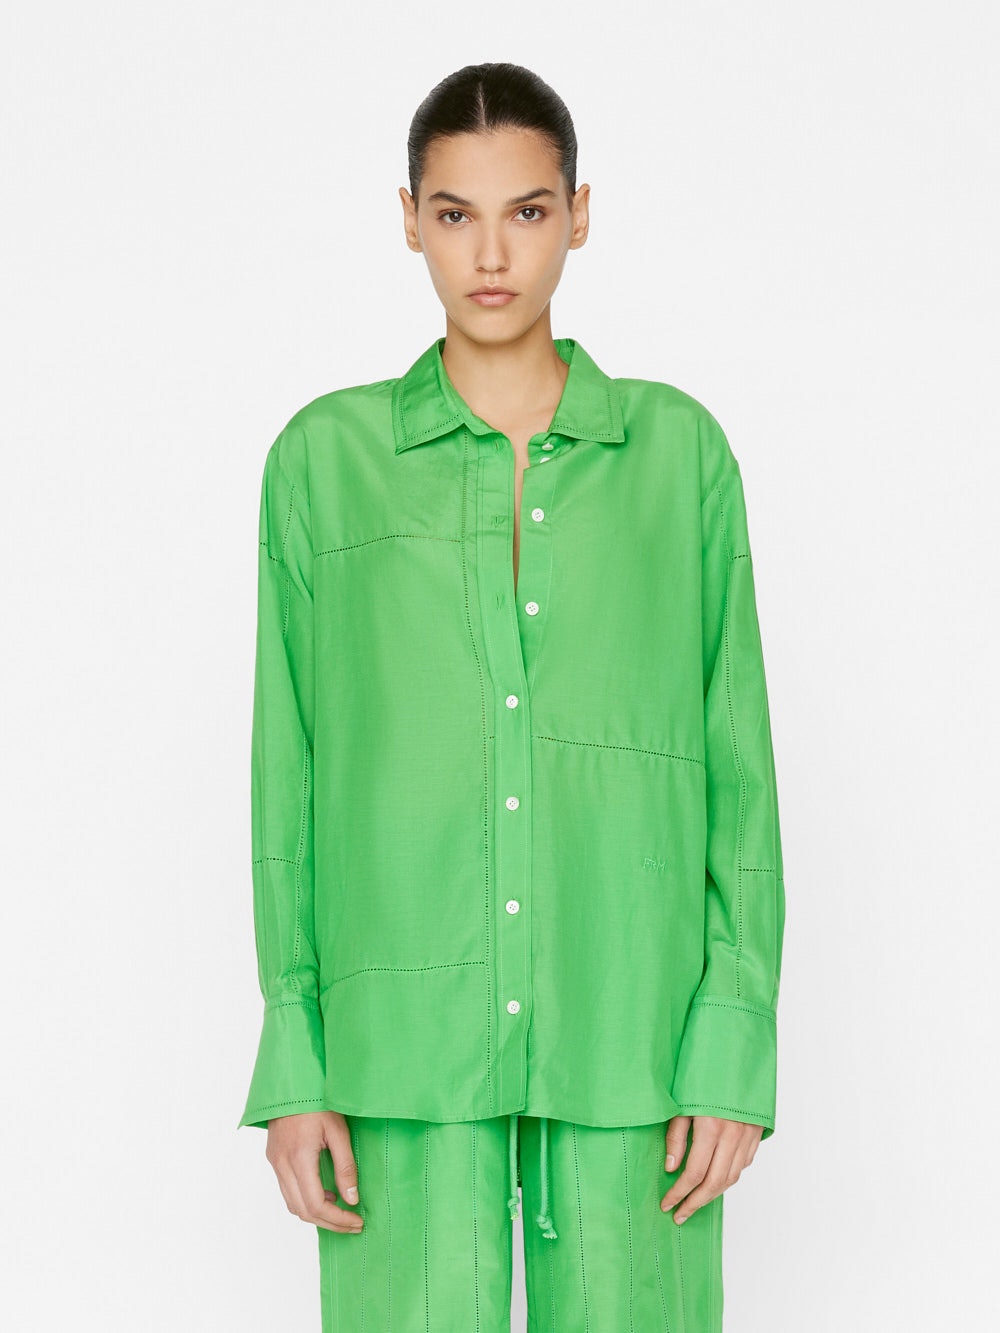 The Oversized Linear Lace Shirt in Bright Peridot by Frame Denim